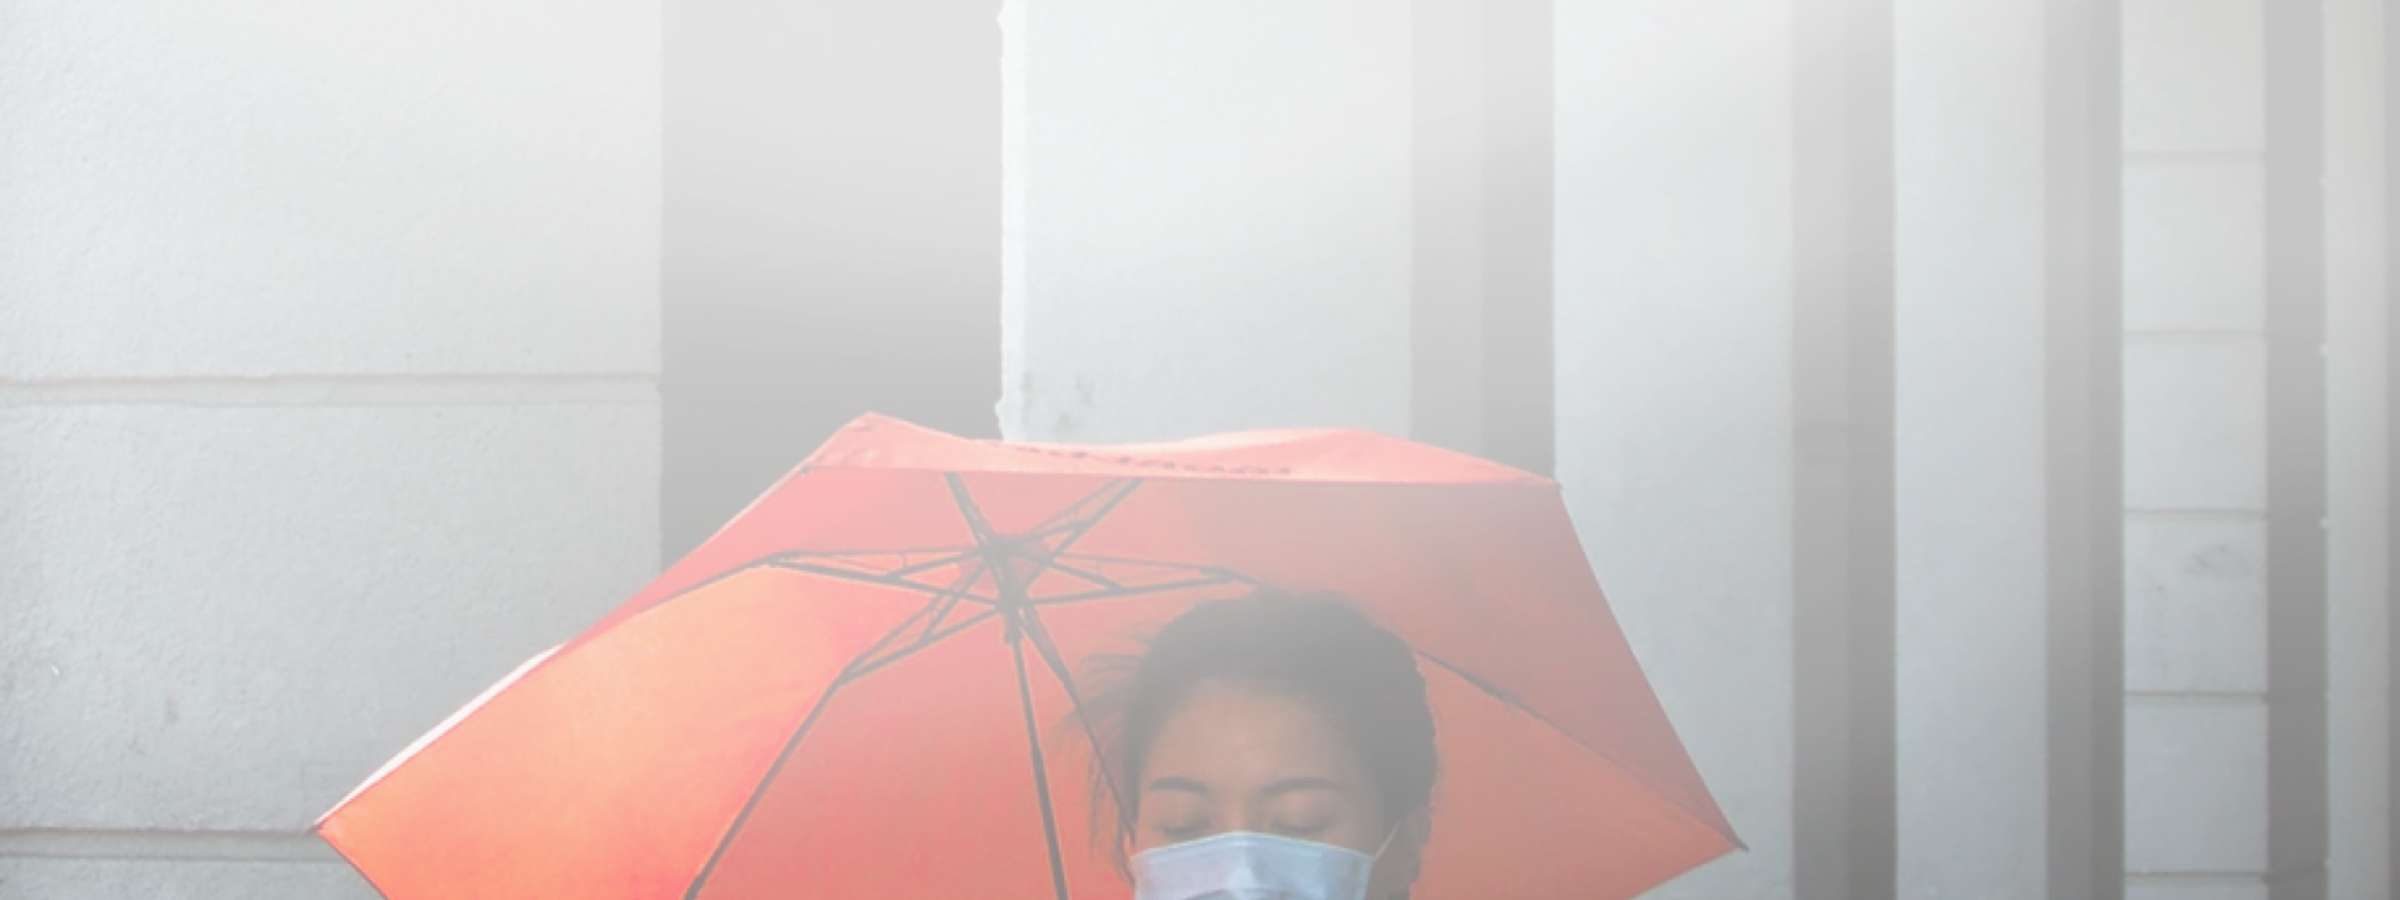 A woman wearing a face mask and carrying a red umbrella walks down a rainy street, while looking at her phone